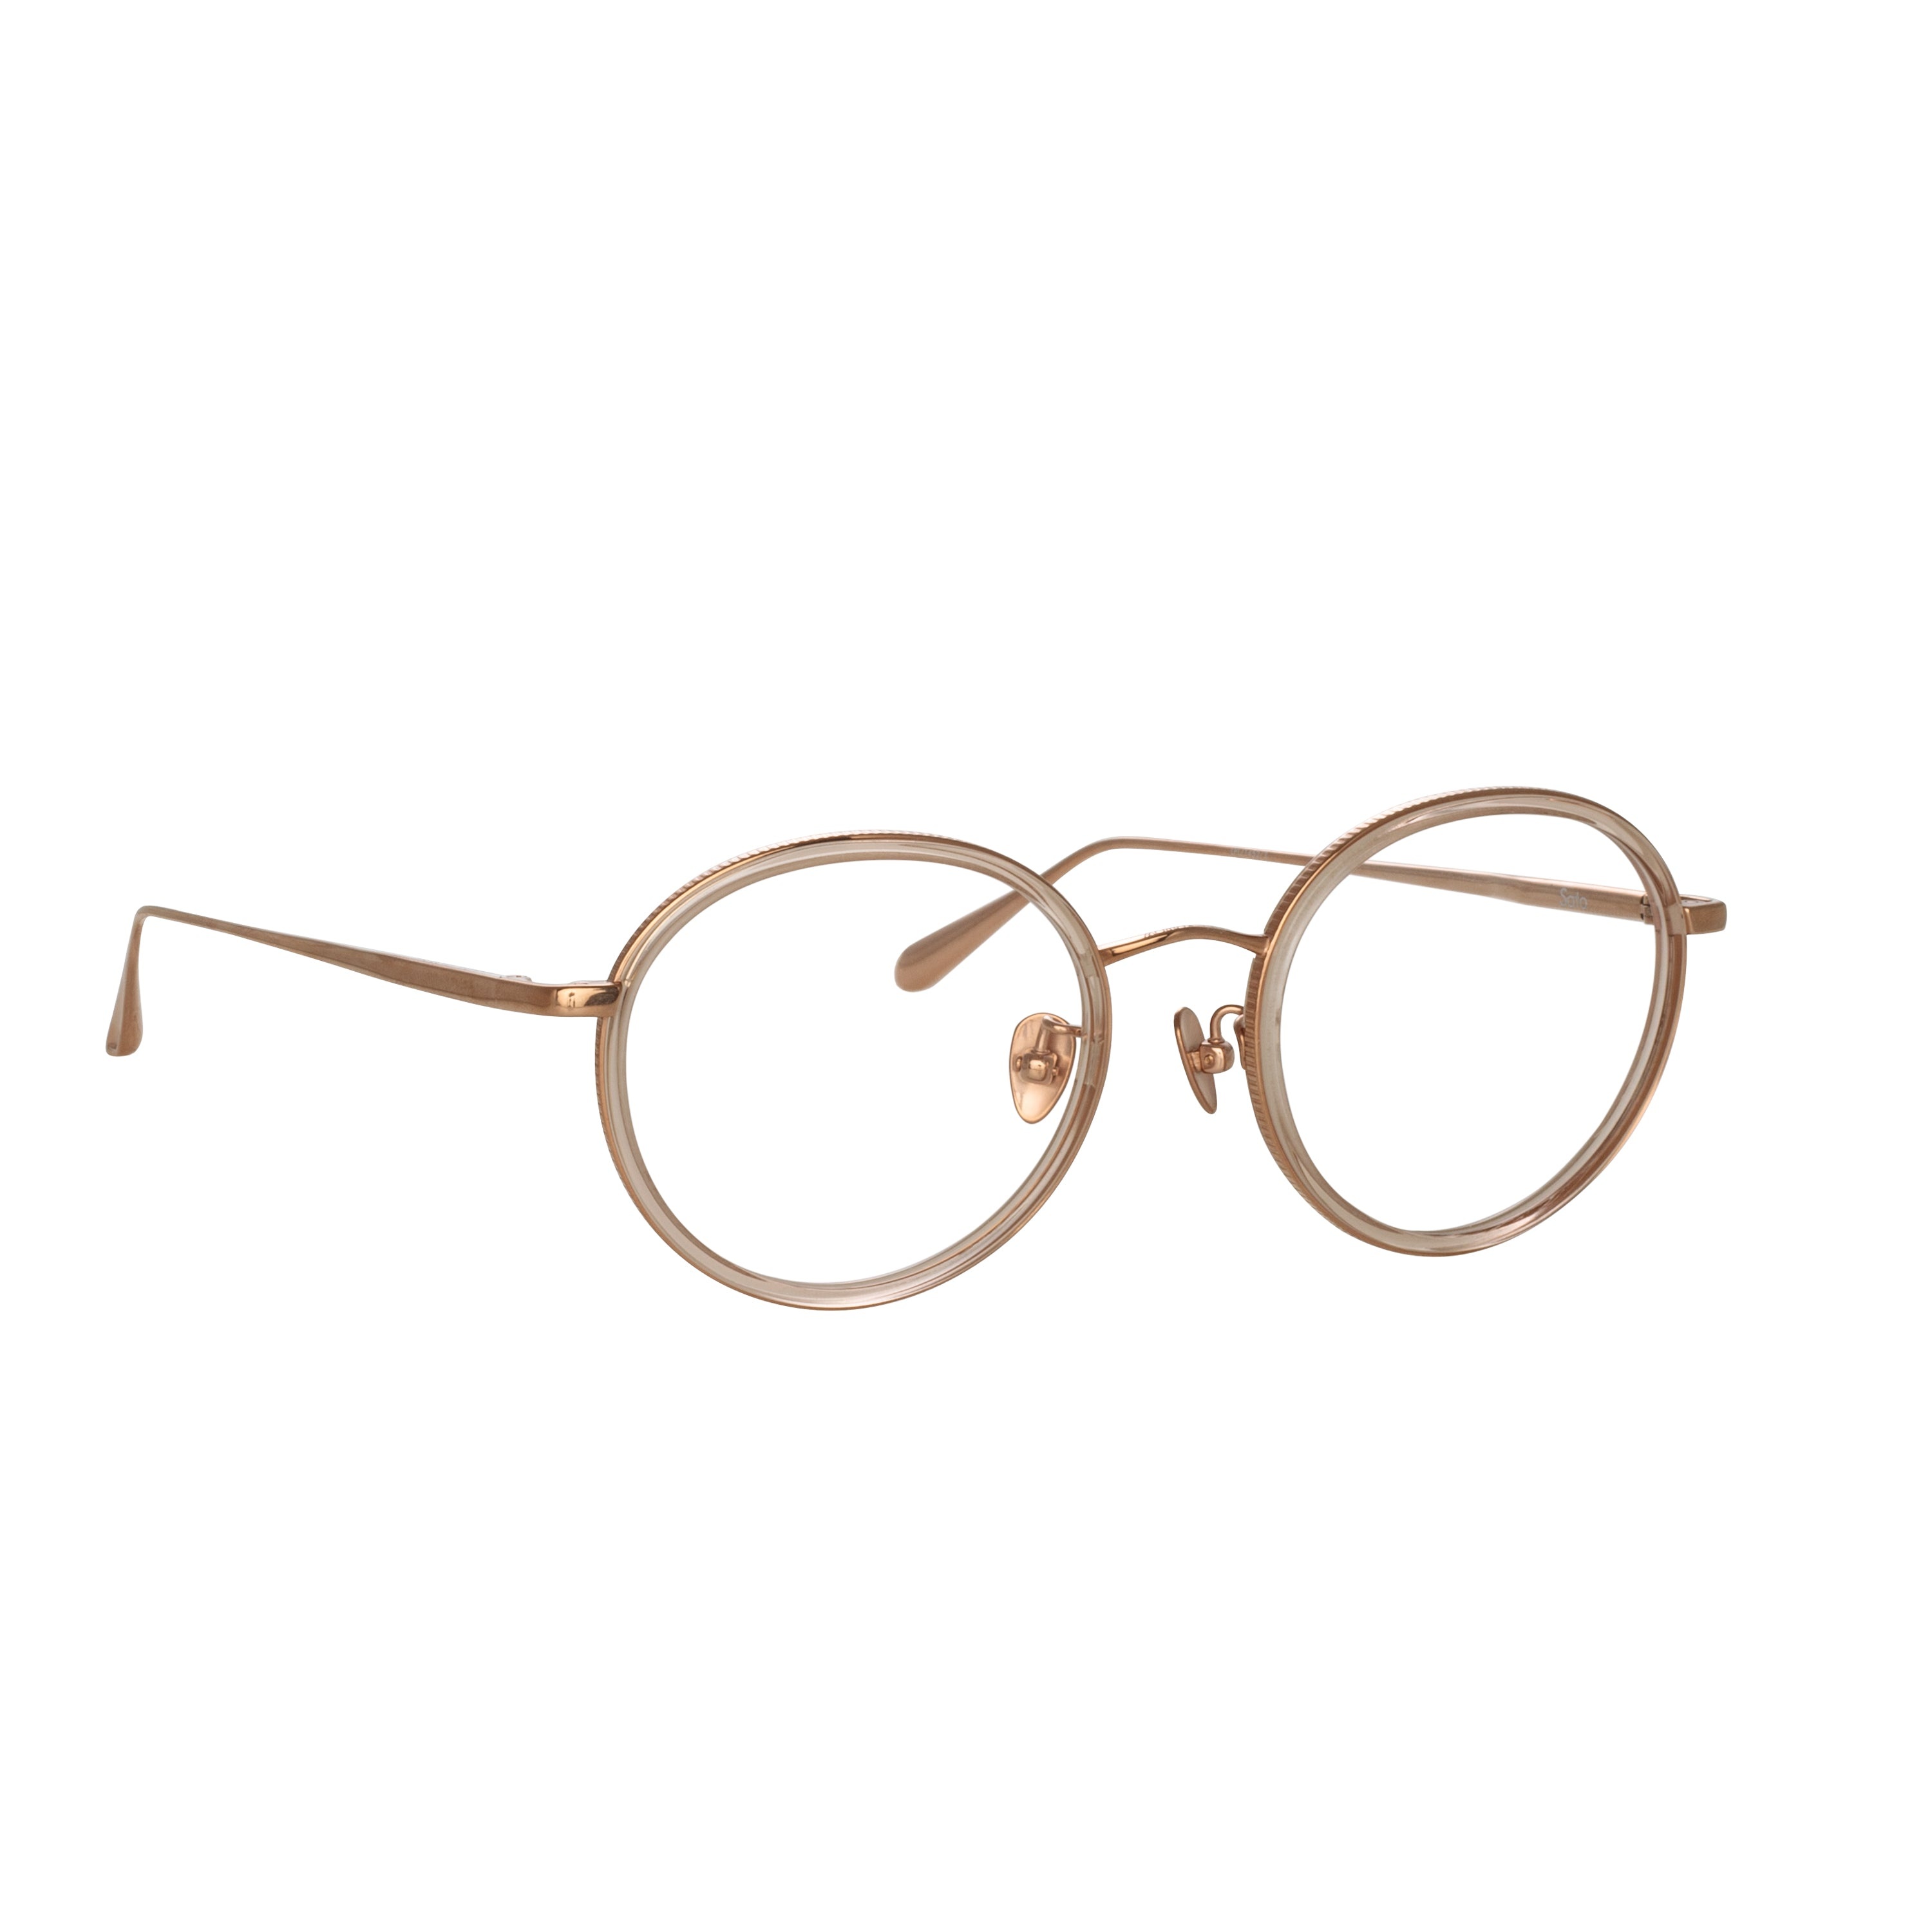 SATO OVAL OPTICAL FRAME IN ROSE GOLD - 2